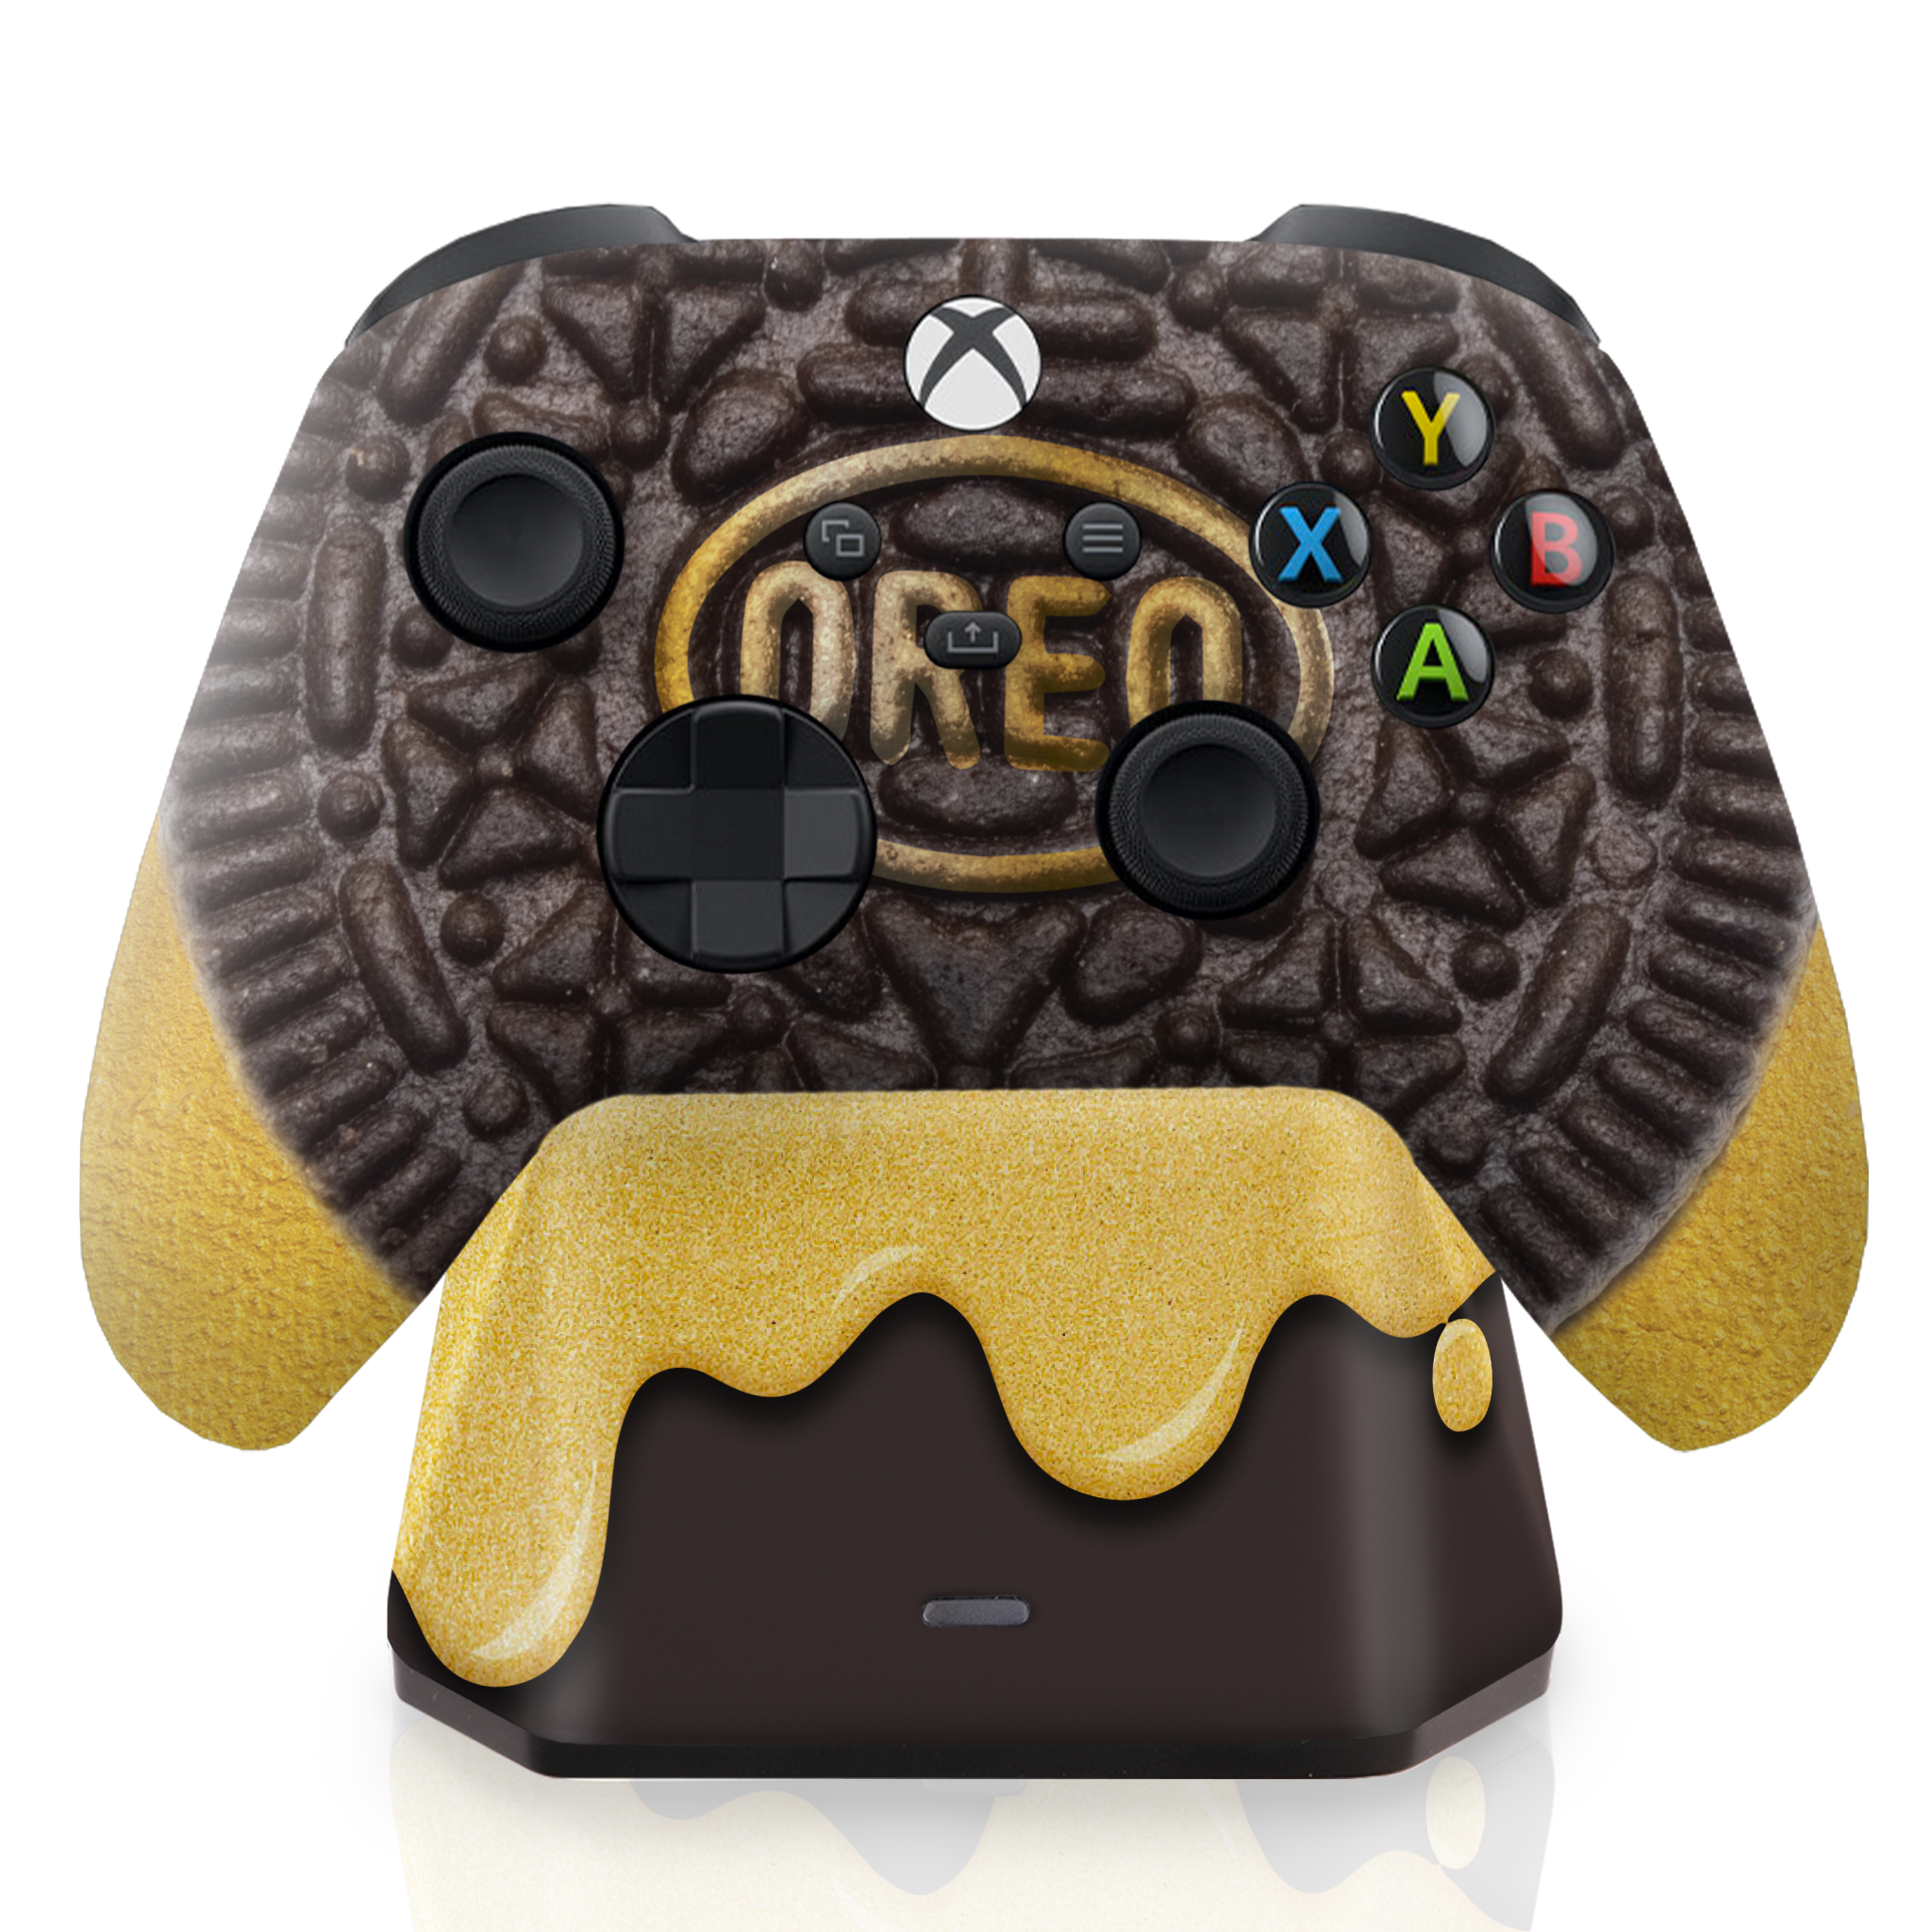 OREO GOLD Xbox Series X Controller with Charging Station | Xbox X Series